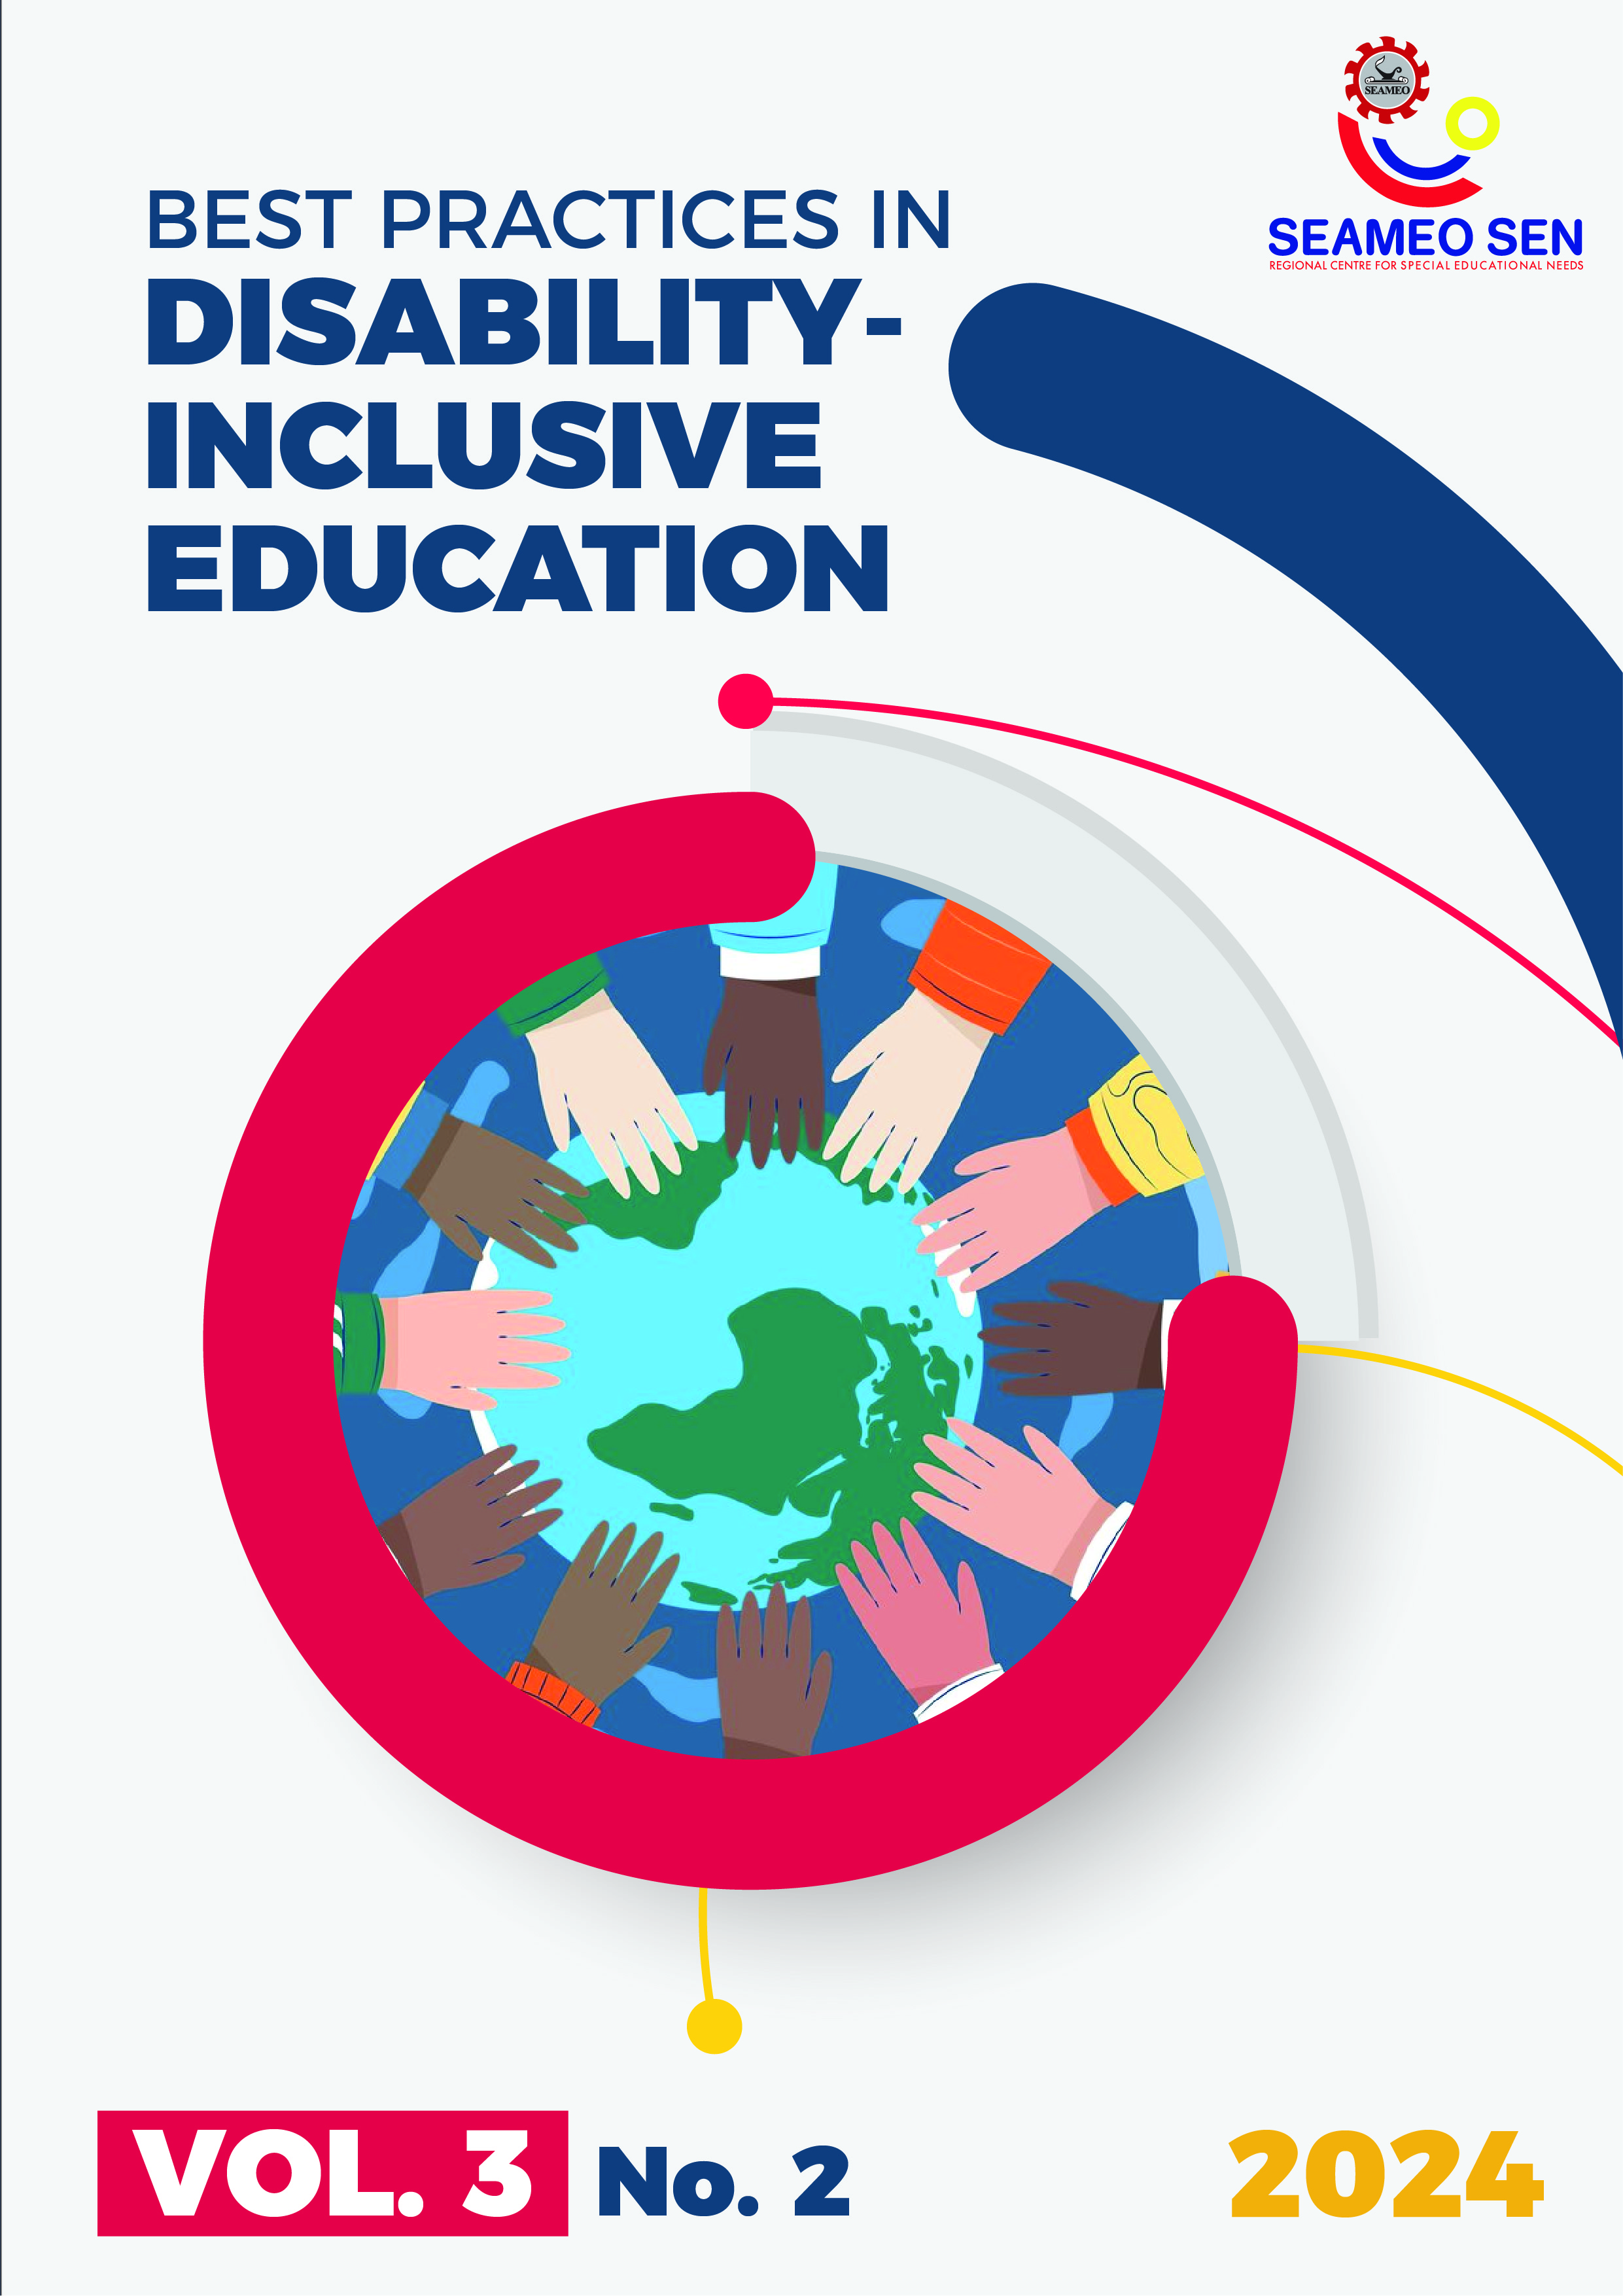 					View Vol. 3 No. 2 (2024): Best Practices in Disability-Inclusive Education
				